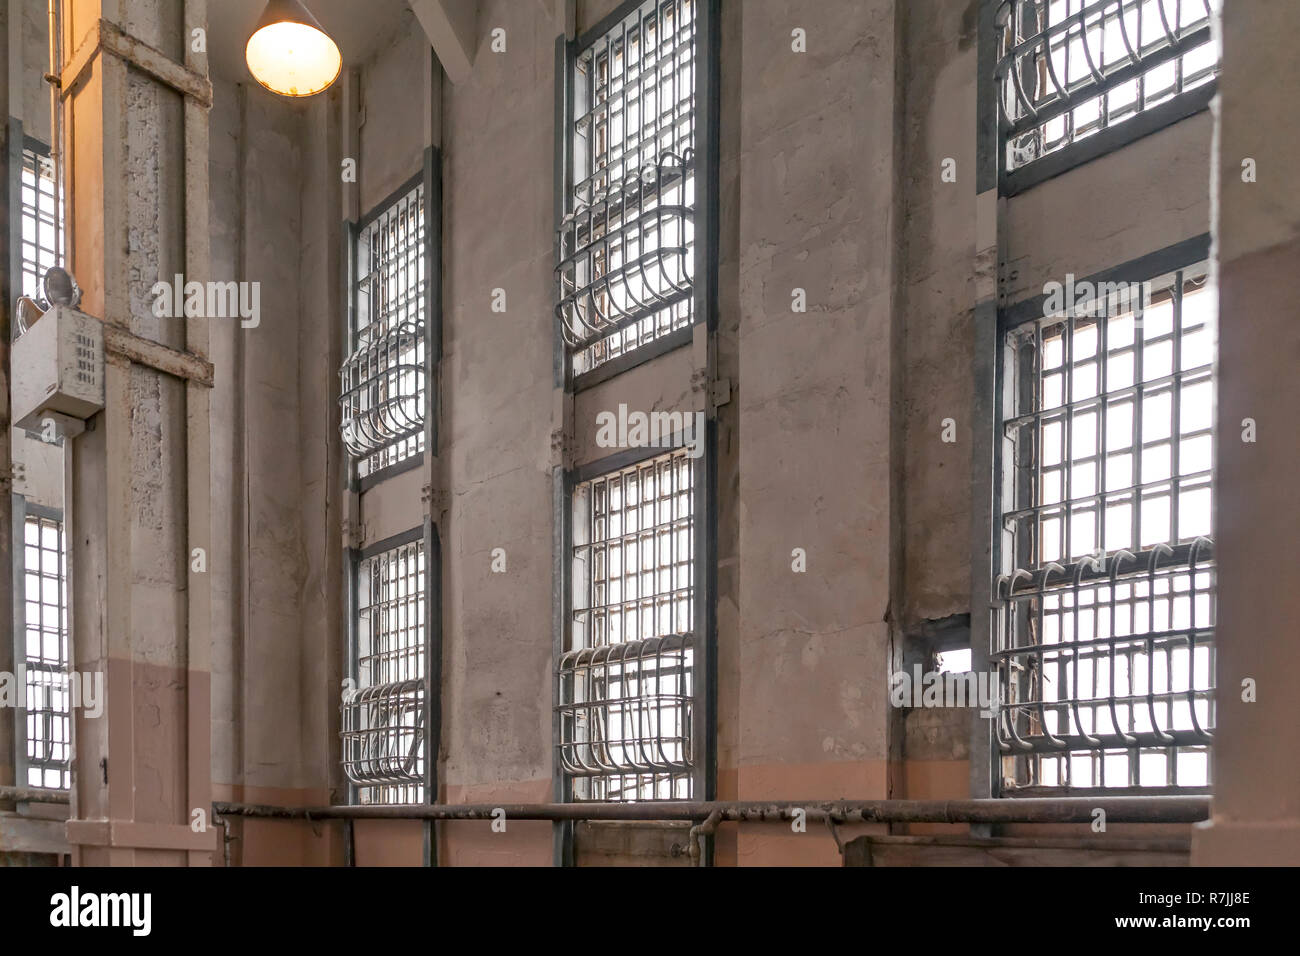 Old correctional penitentiary jailhouse multilevel wall of windows covered with solid steel vertical and horizontal bars painted in neutral tones. Stock Photo